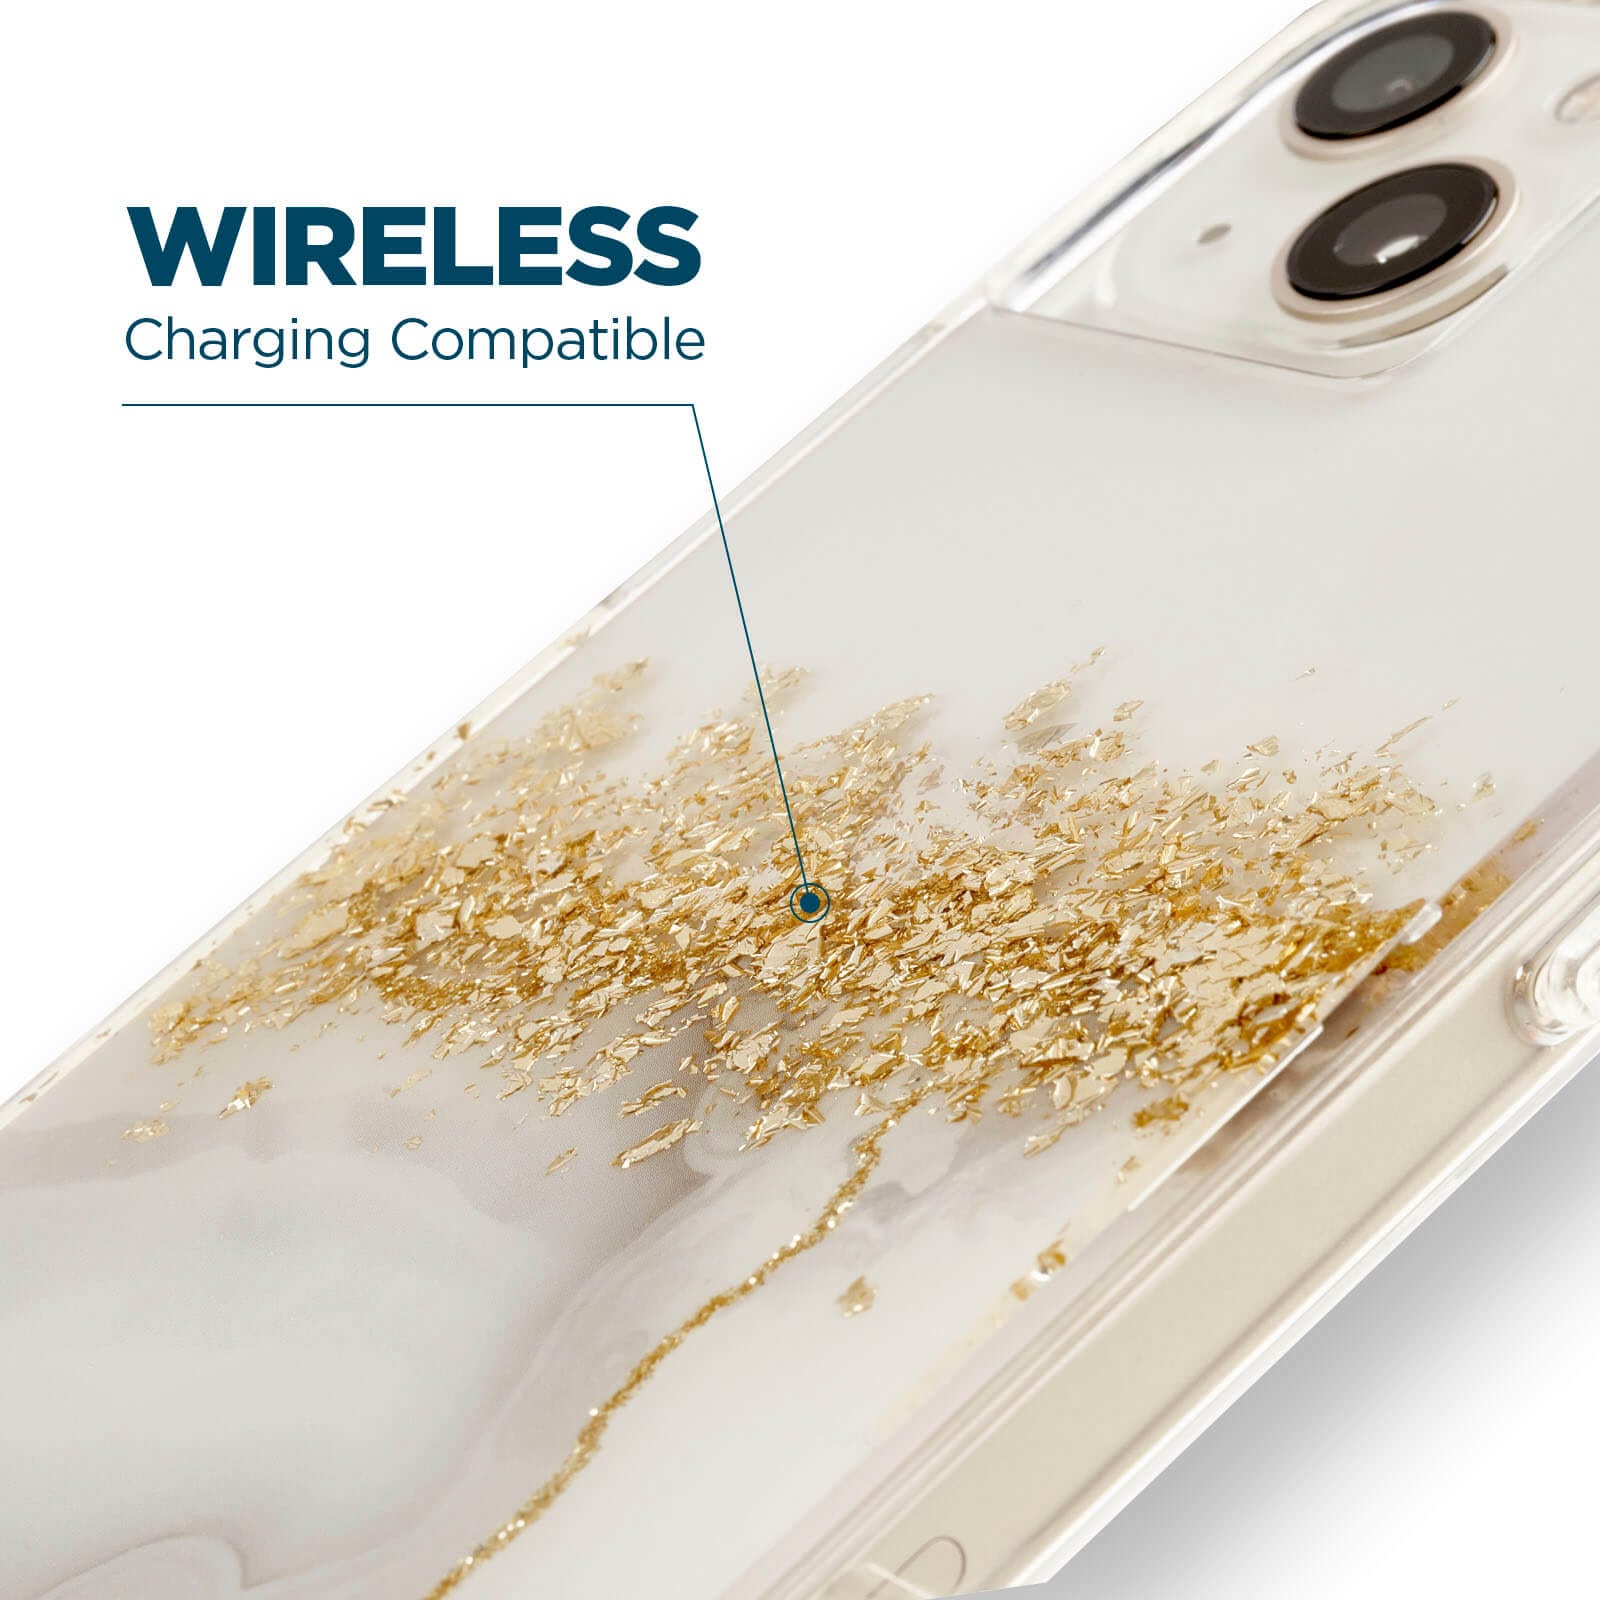 Wireless charging compatible. color::Karat Marble